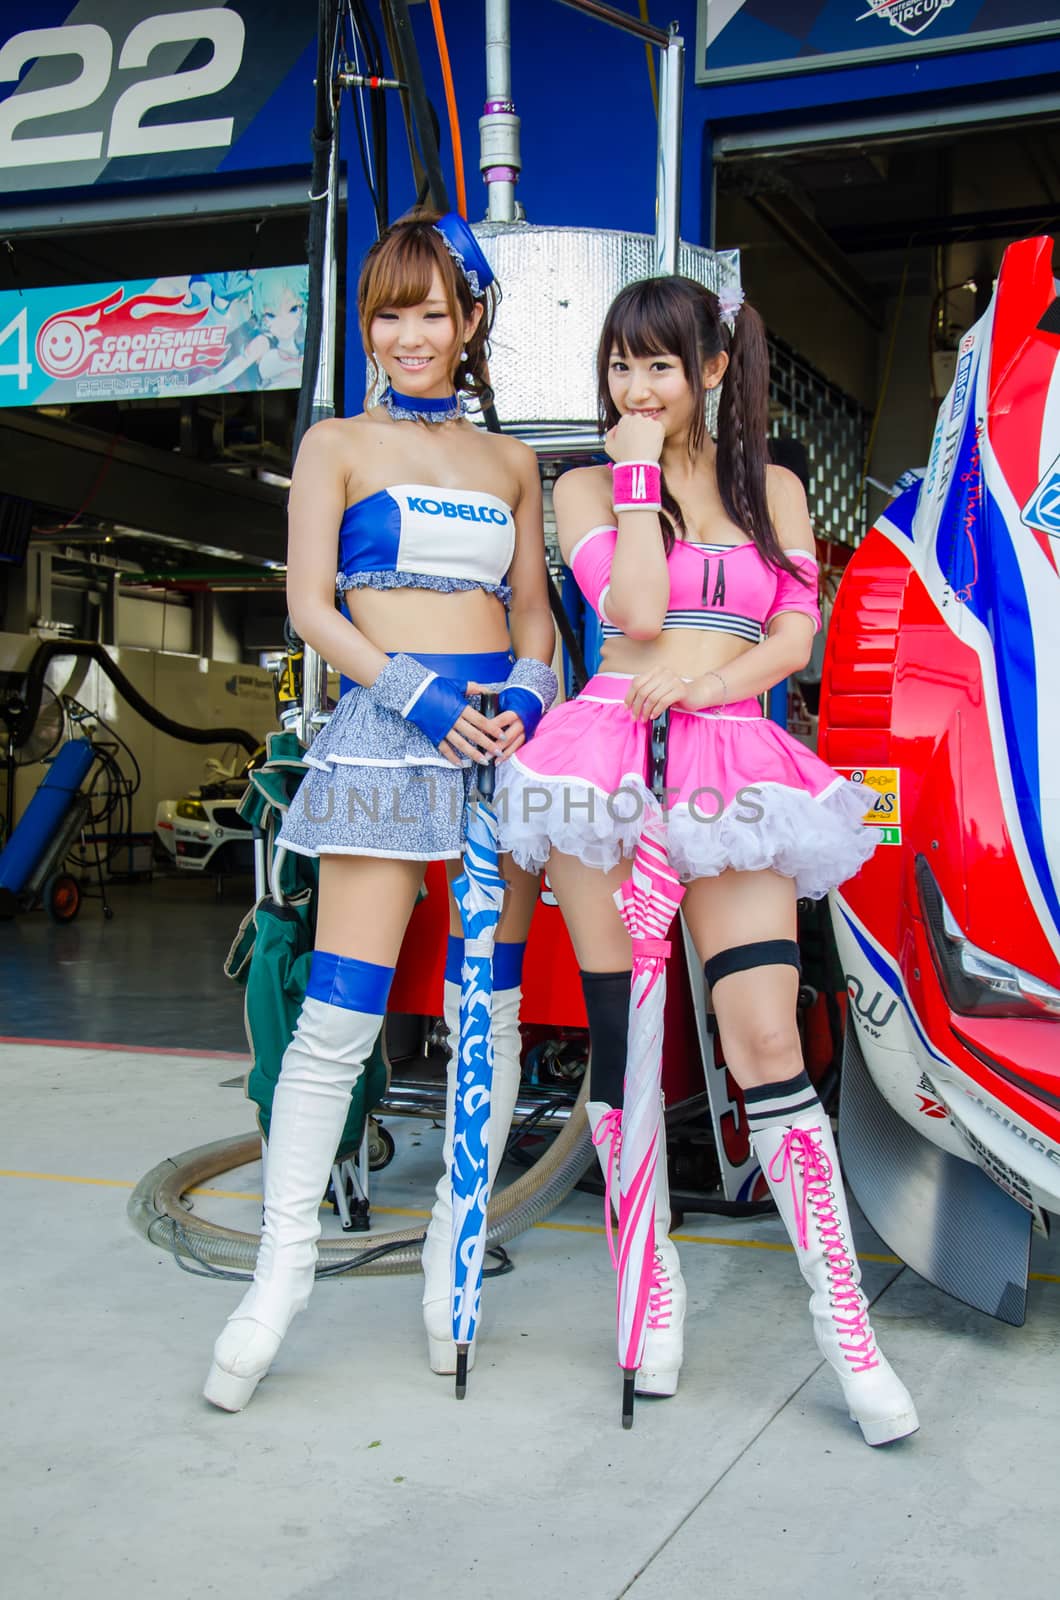 BURIRAM - OCTOBER 4: Unidentified  Race Queen of Japan with racing car on display at The 2014 Autobacs Super GT Series Race 7 on October 4, 2014 at Chang International Racing Circuit, Buriram Thailand